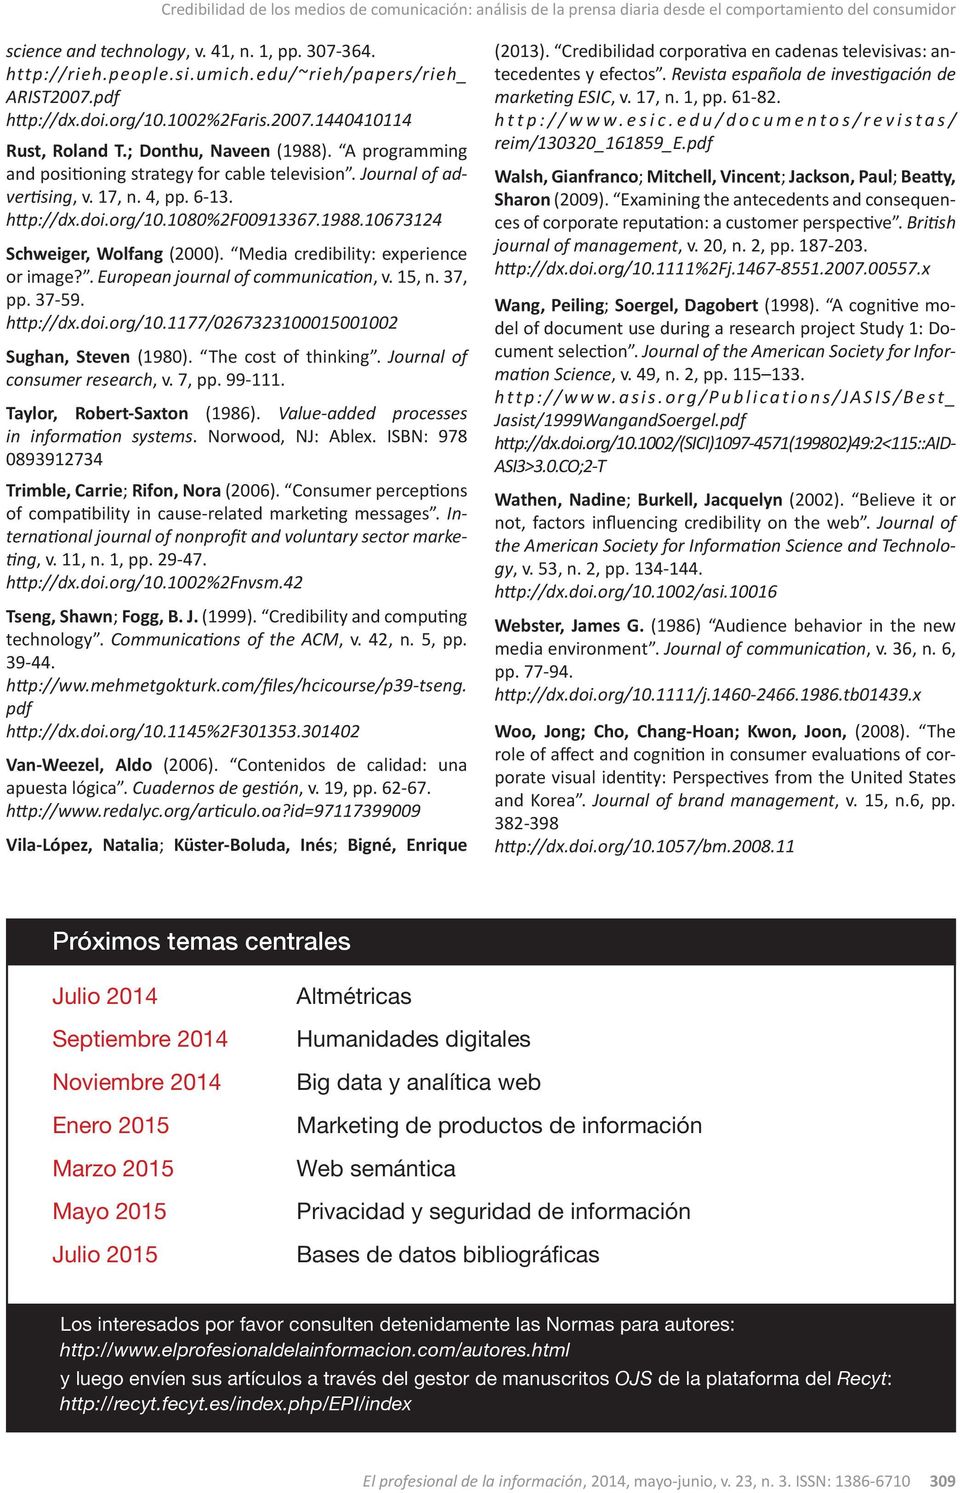 Journal of advertising, v. 17, n. 4, pp. 6-13. http://dx.doi.org/10.1080%2f00913367.1988.10673124 Schweiger, Wolfang (2000). Media credibility: experience or image?